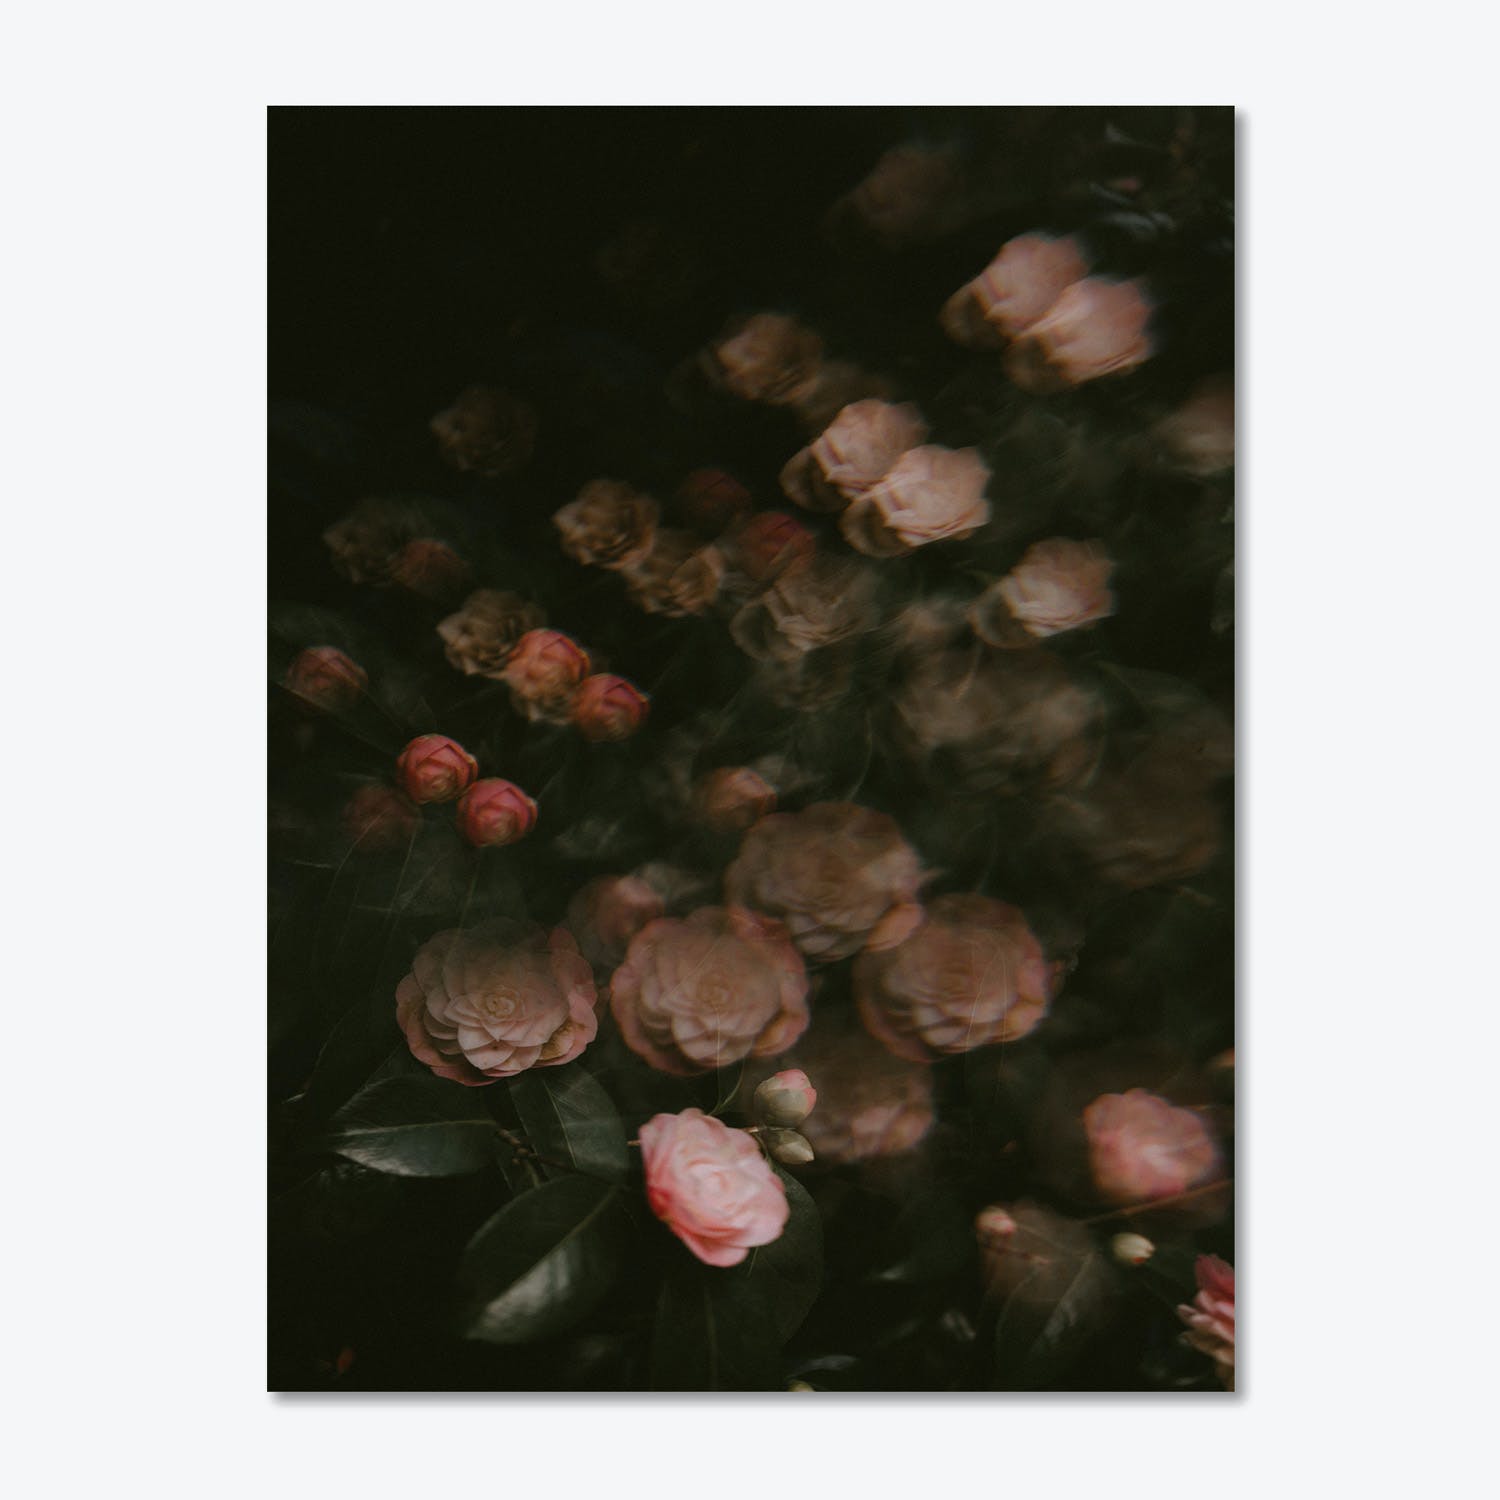 Dreamy and ethereal, blurred roses create a mesmerizing floral landscape.